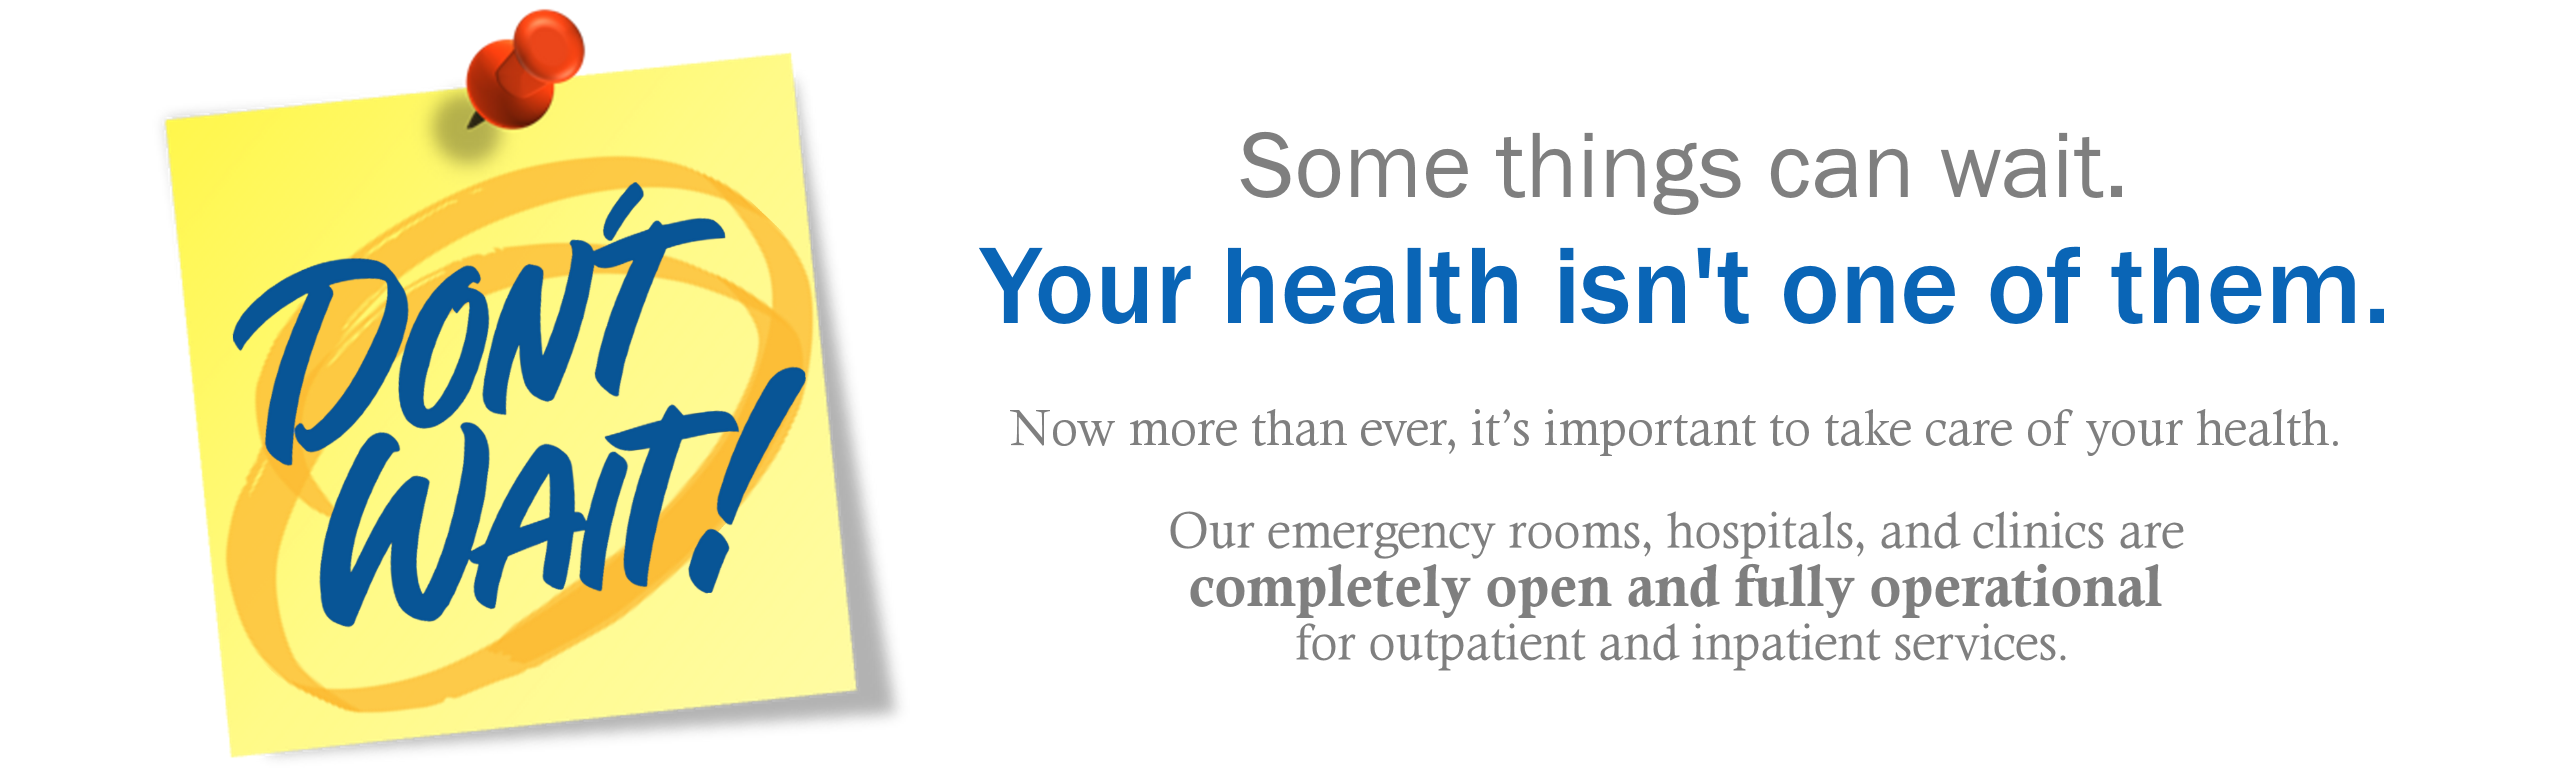 Banner that says:
Dont wait! Somethings can wait. Your health isnt one of them. Now more than ever, it's important to take care of your health. Our Emergency rooms, hospital, and clinics are completely open and fully operational for outpatient and inpatient services.